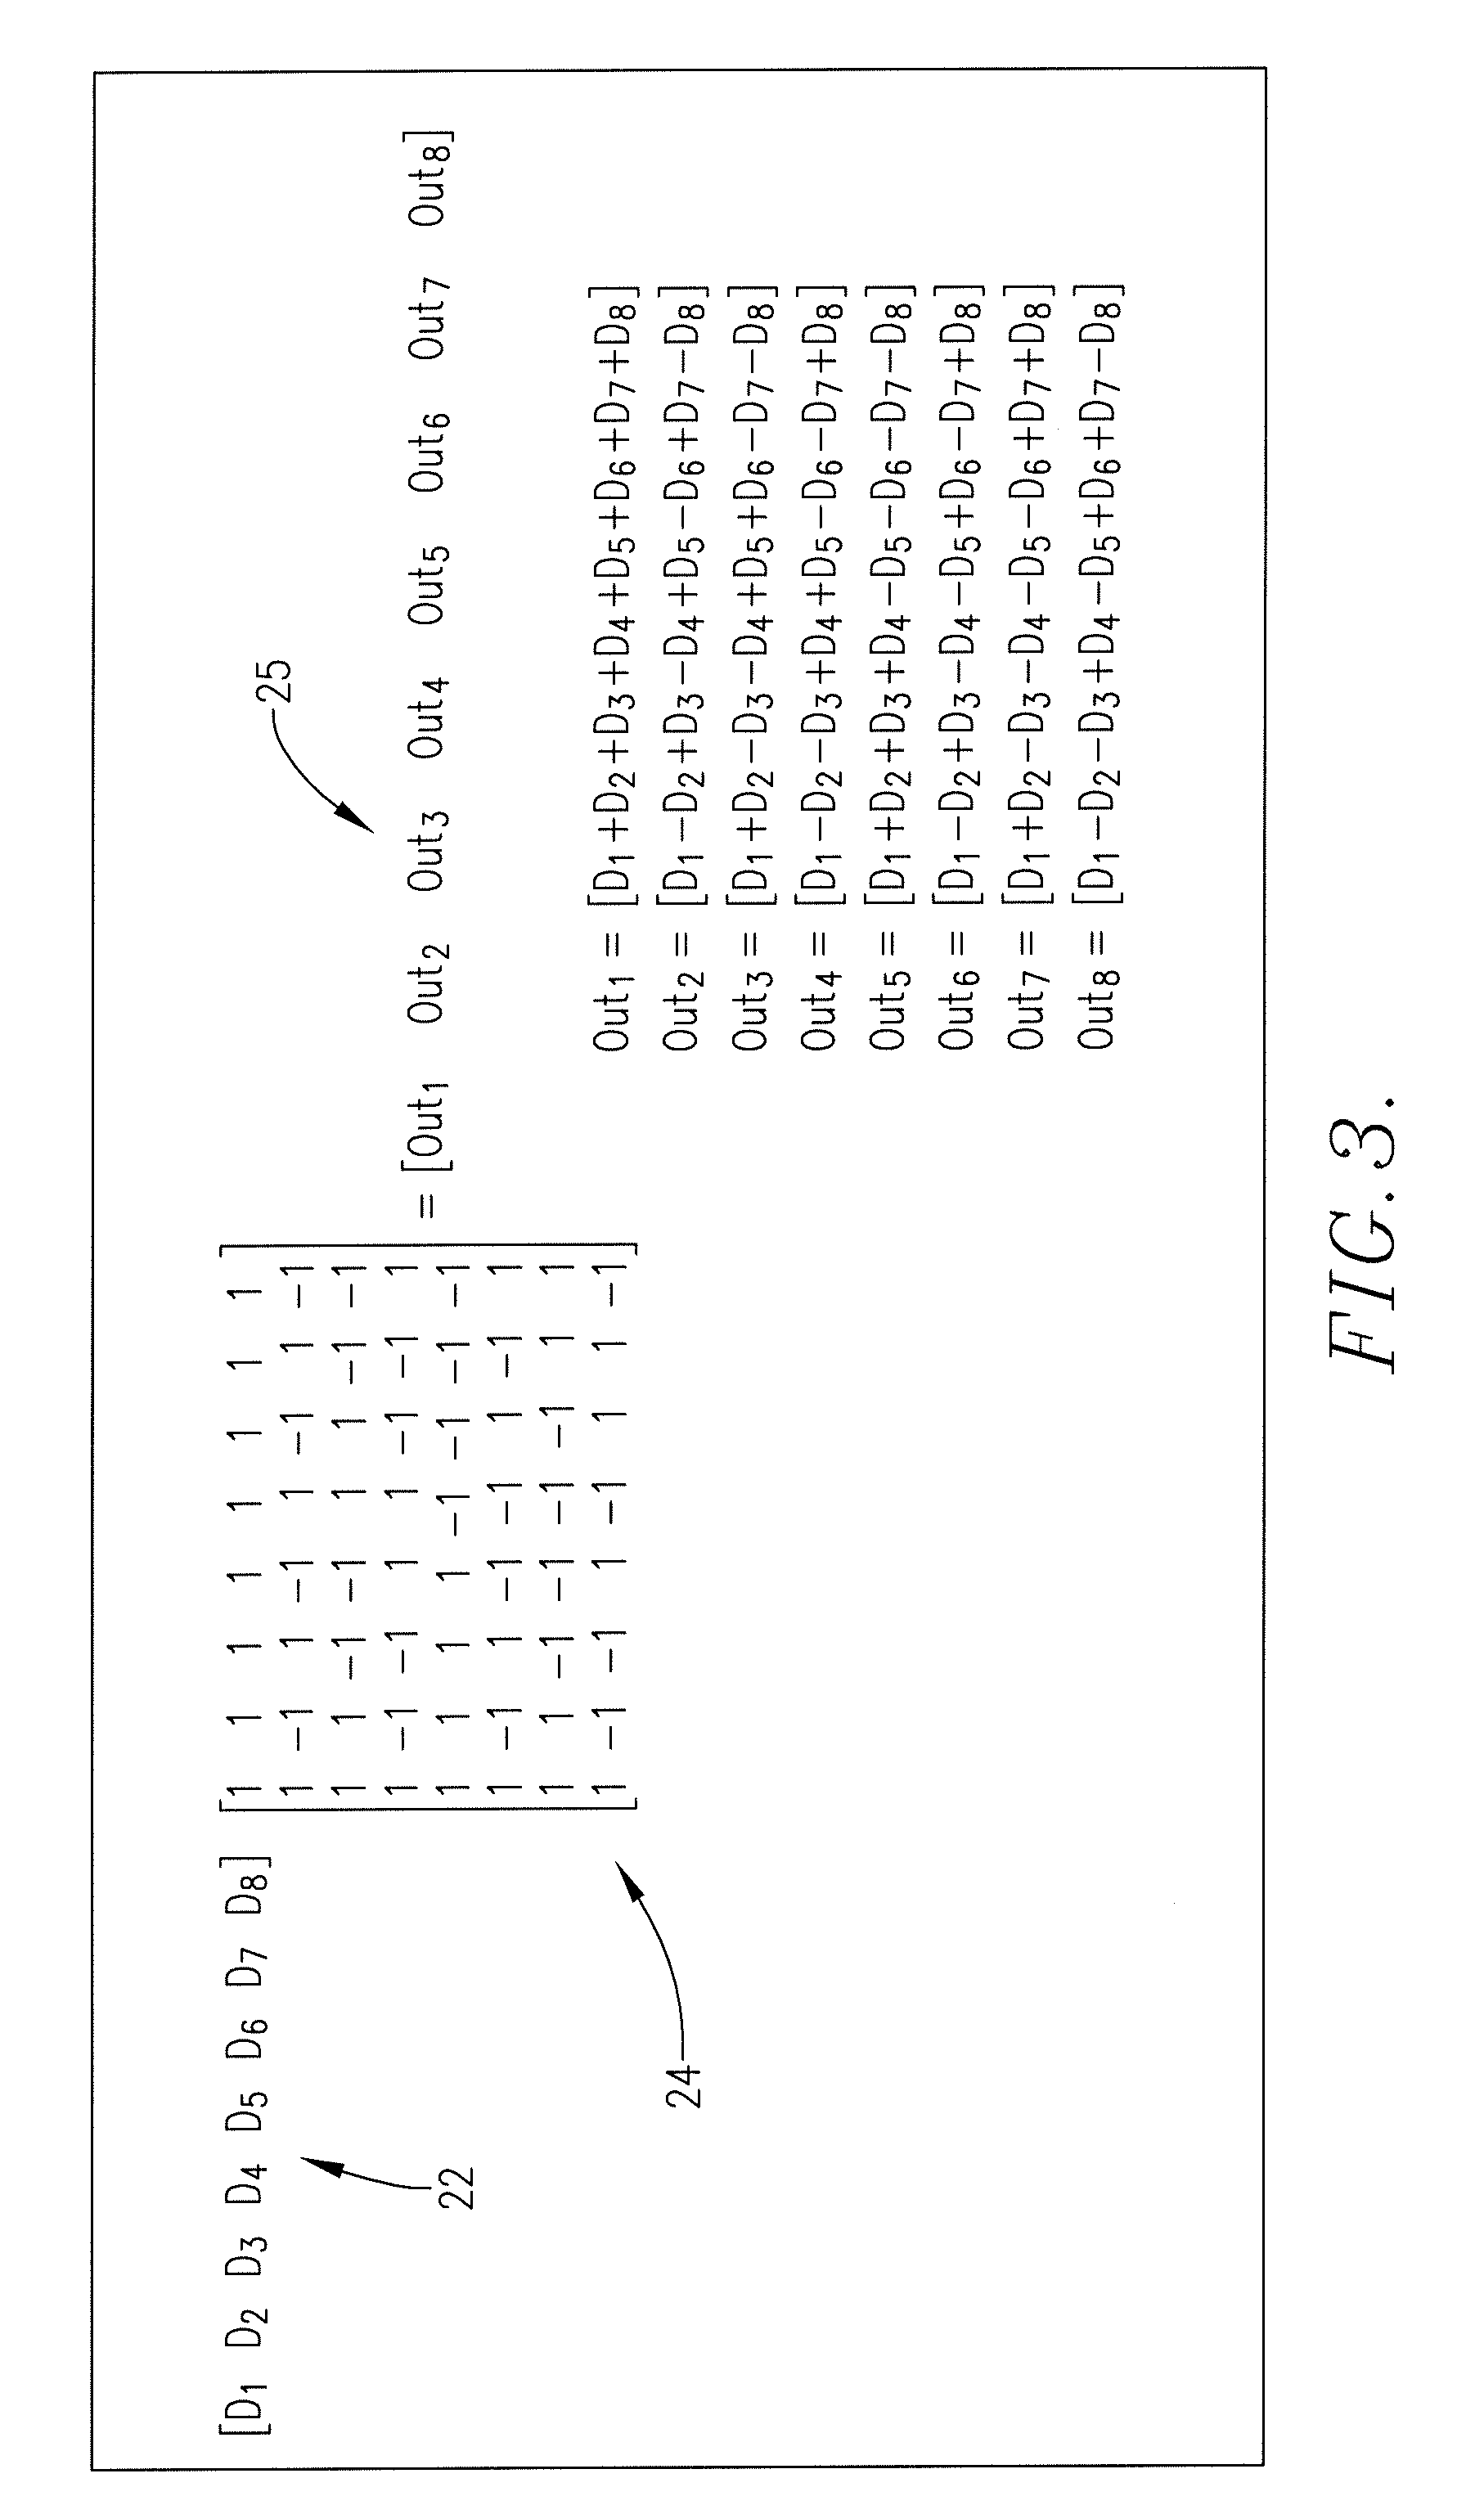 System and method for performing an optimized discrete walsh transform